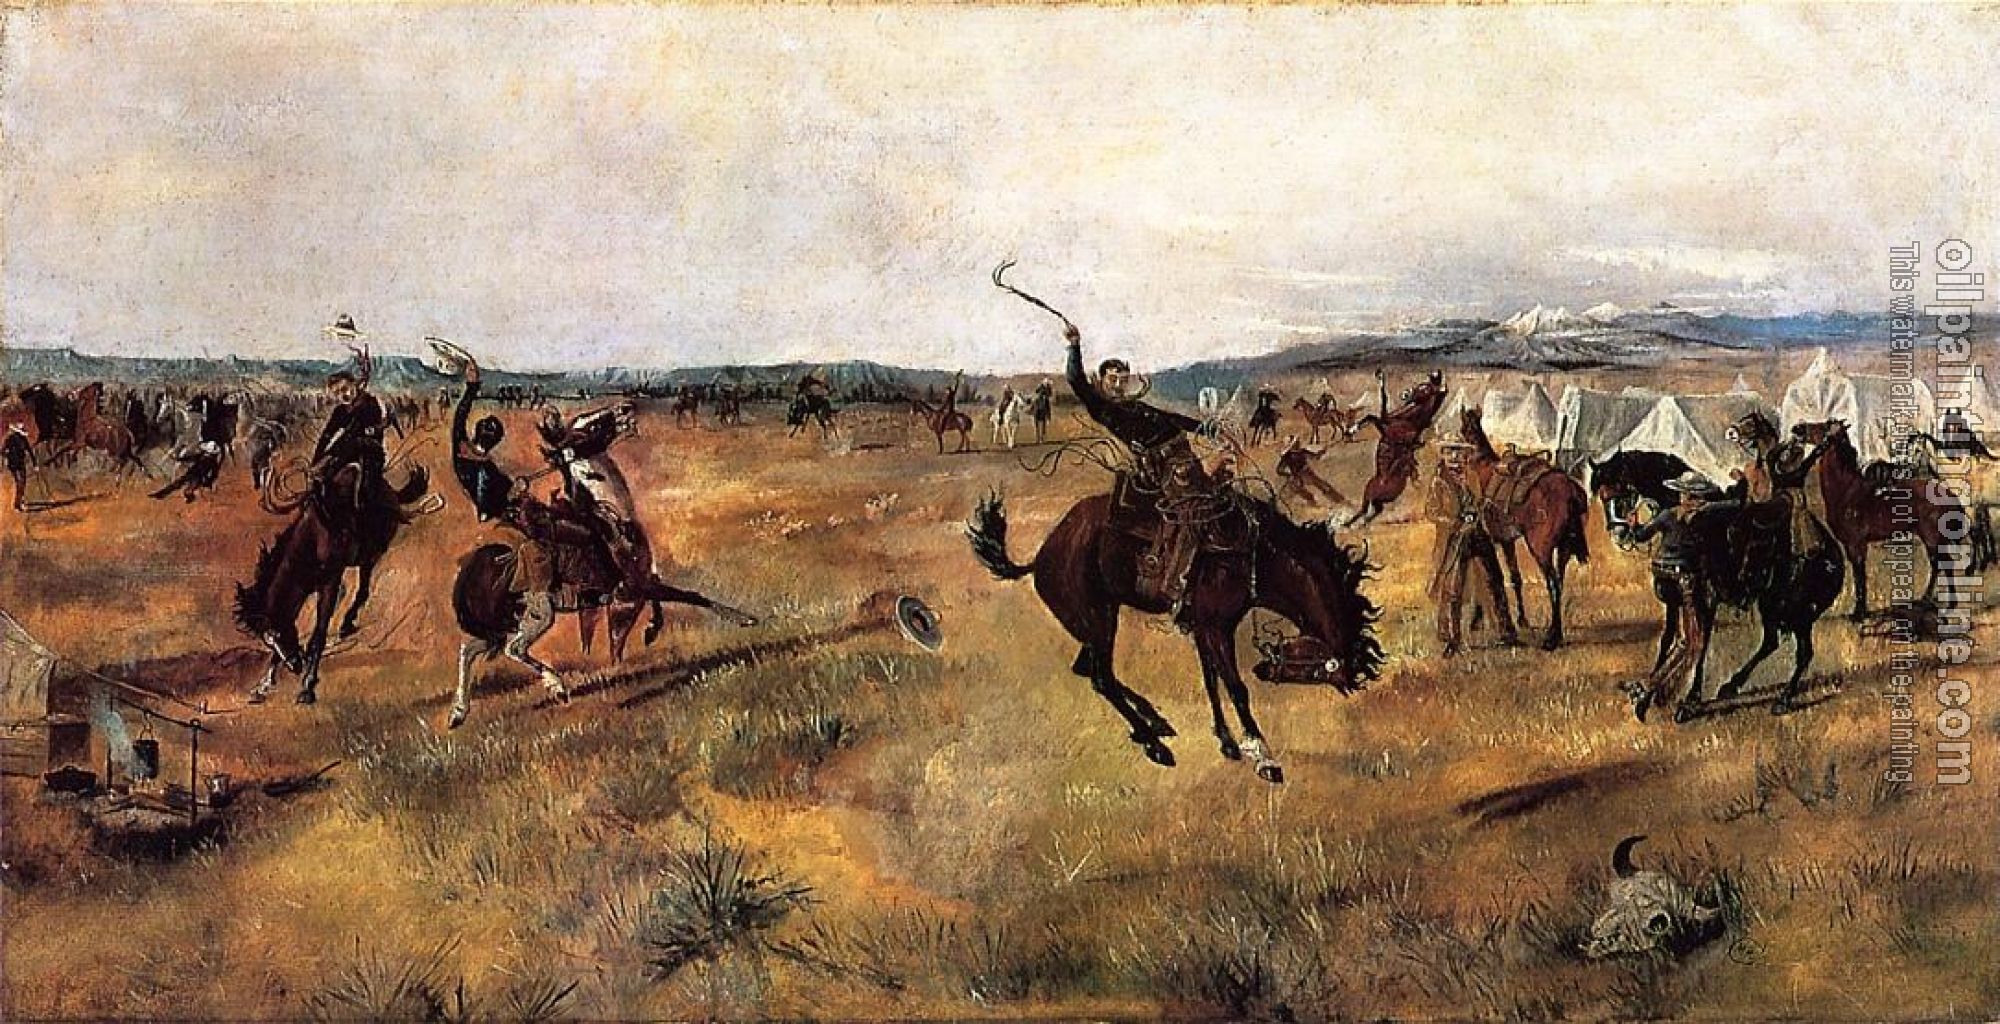 Charles Marion Russell - Breaking Camp